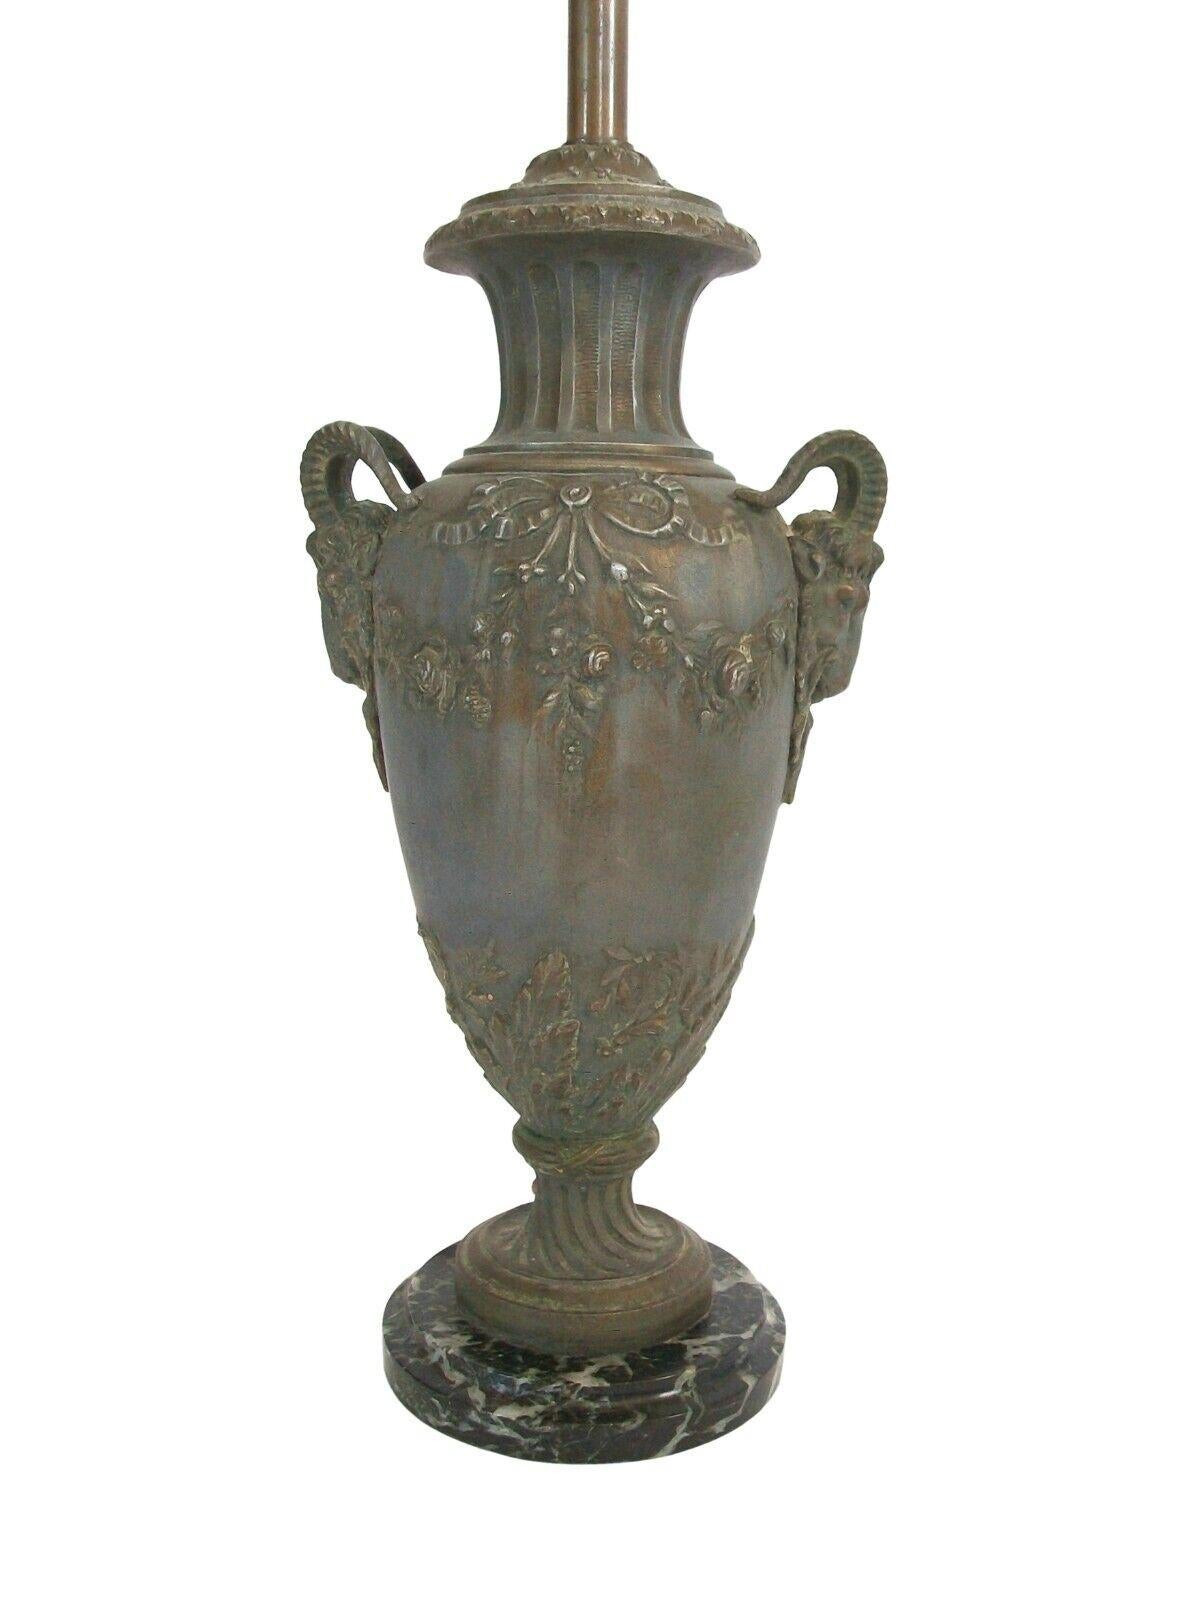 Fabrication Française (Consortium of French Foundries - Active 1892-1915) - Antique Louis XVI style Cassolette lamp - medium size - verdigris finish - featuring Ram's head handles to each side - embossed floral swags and bows to the front and back -